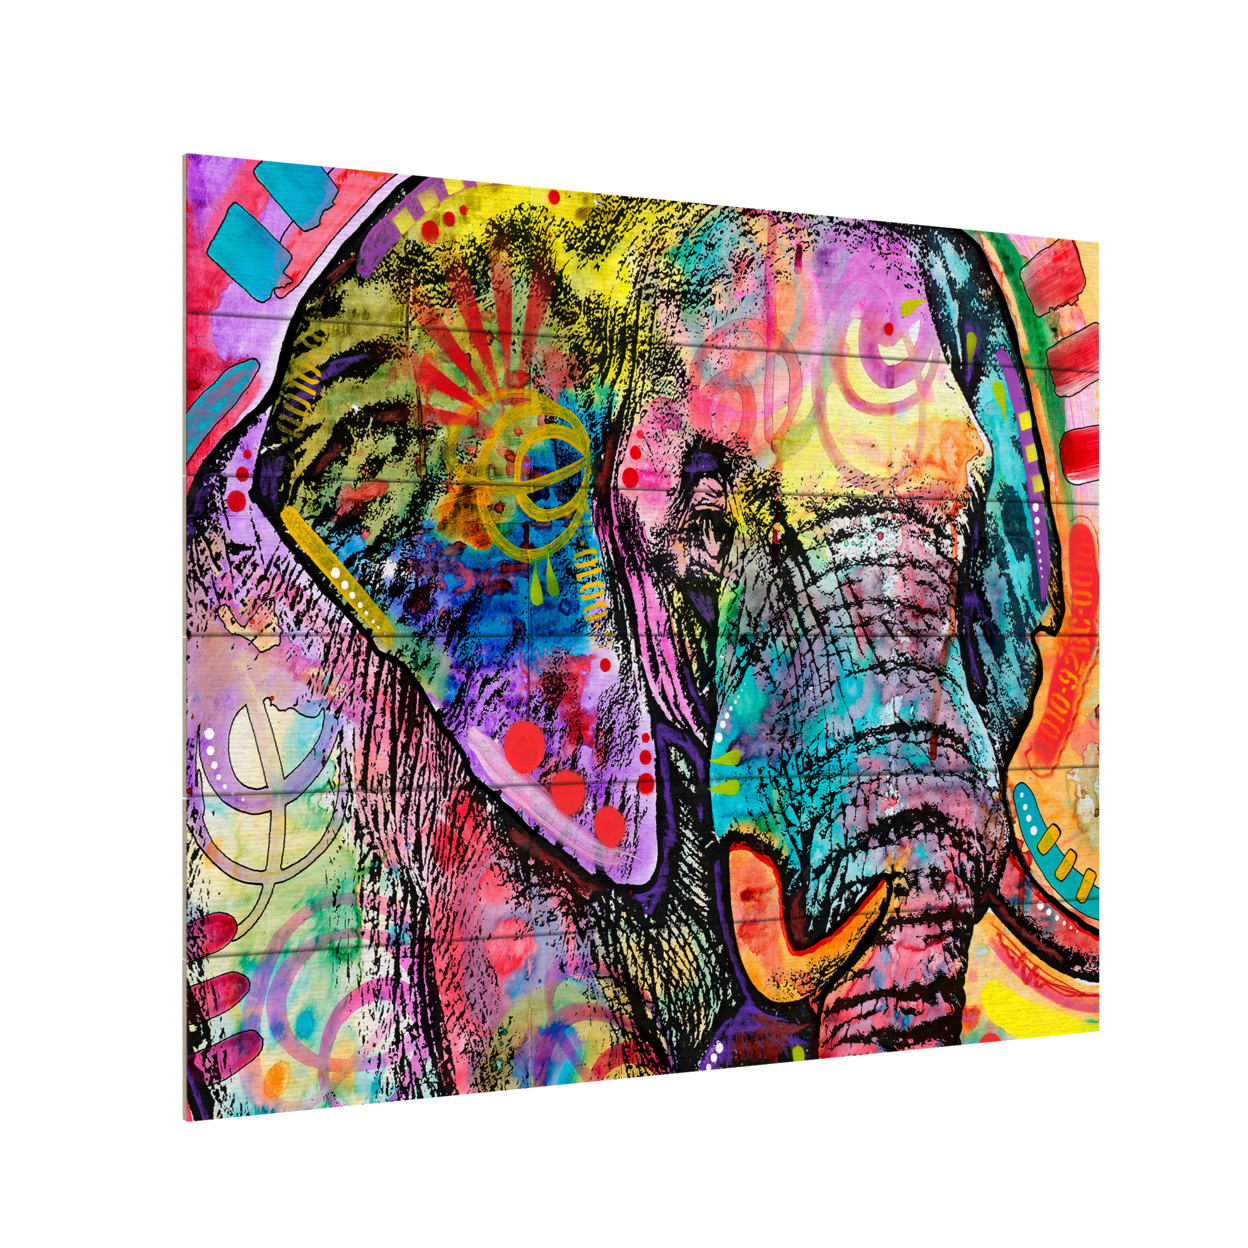 Wooden Slat Art 18 X 22 Inches Titled Elephant Ready To Hang Home Decor Picture